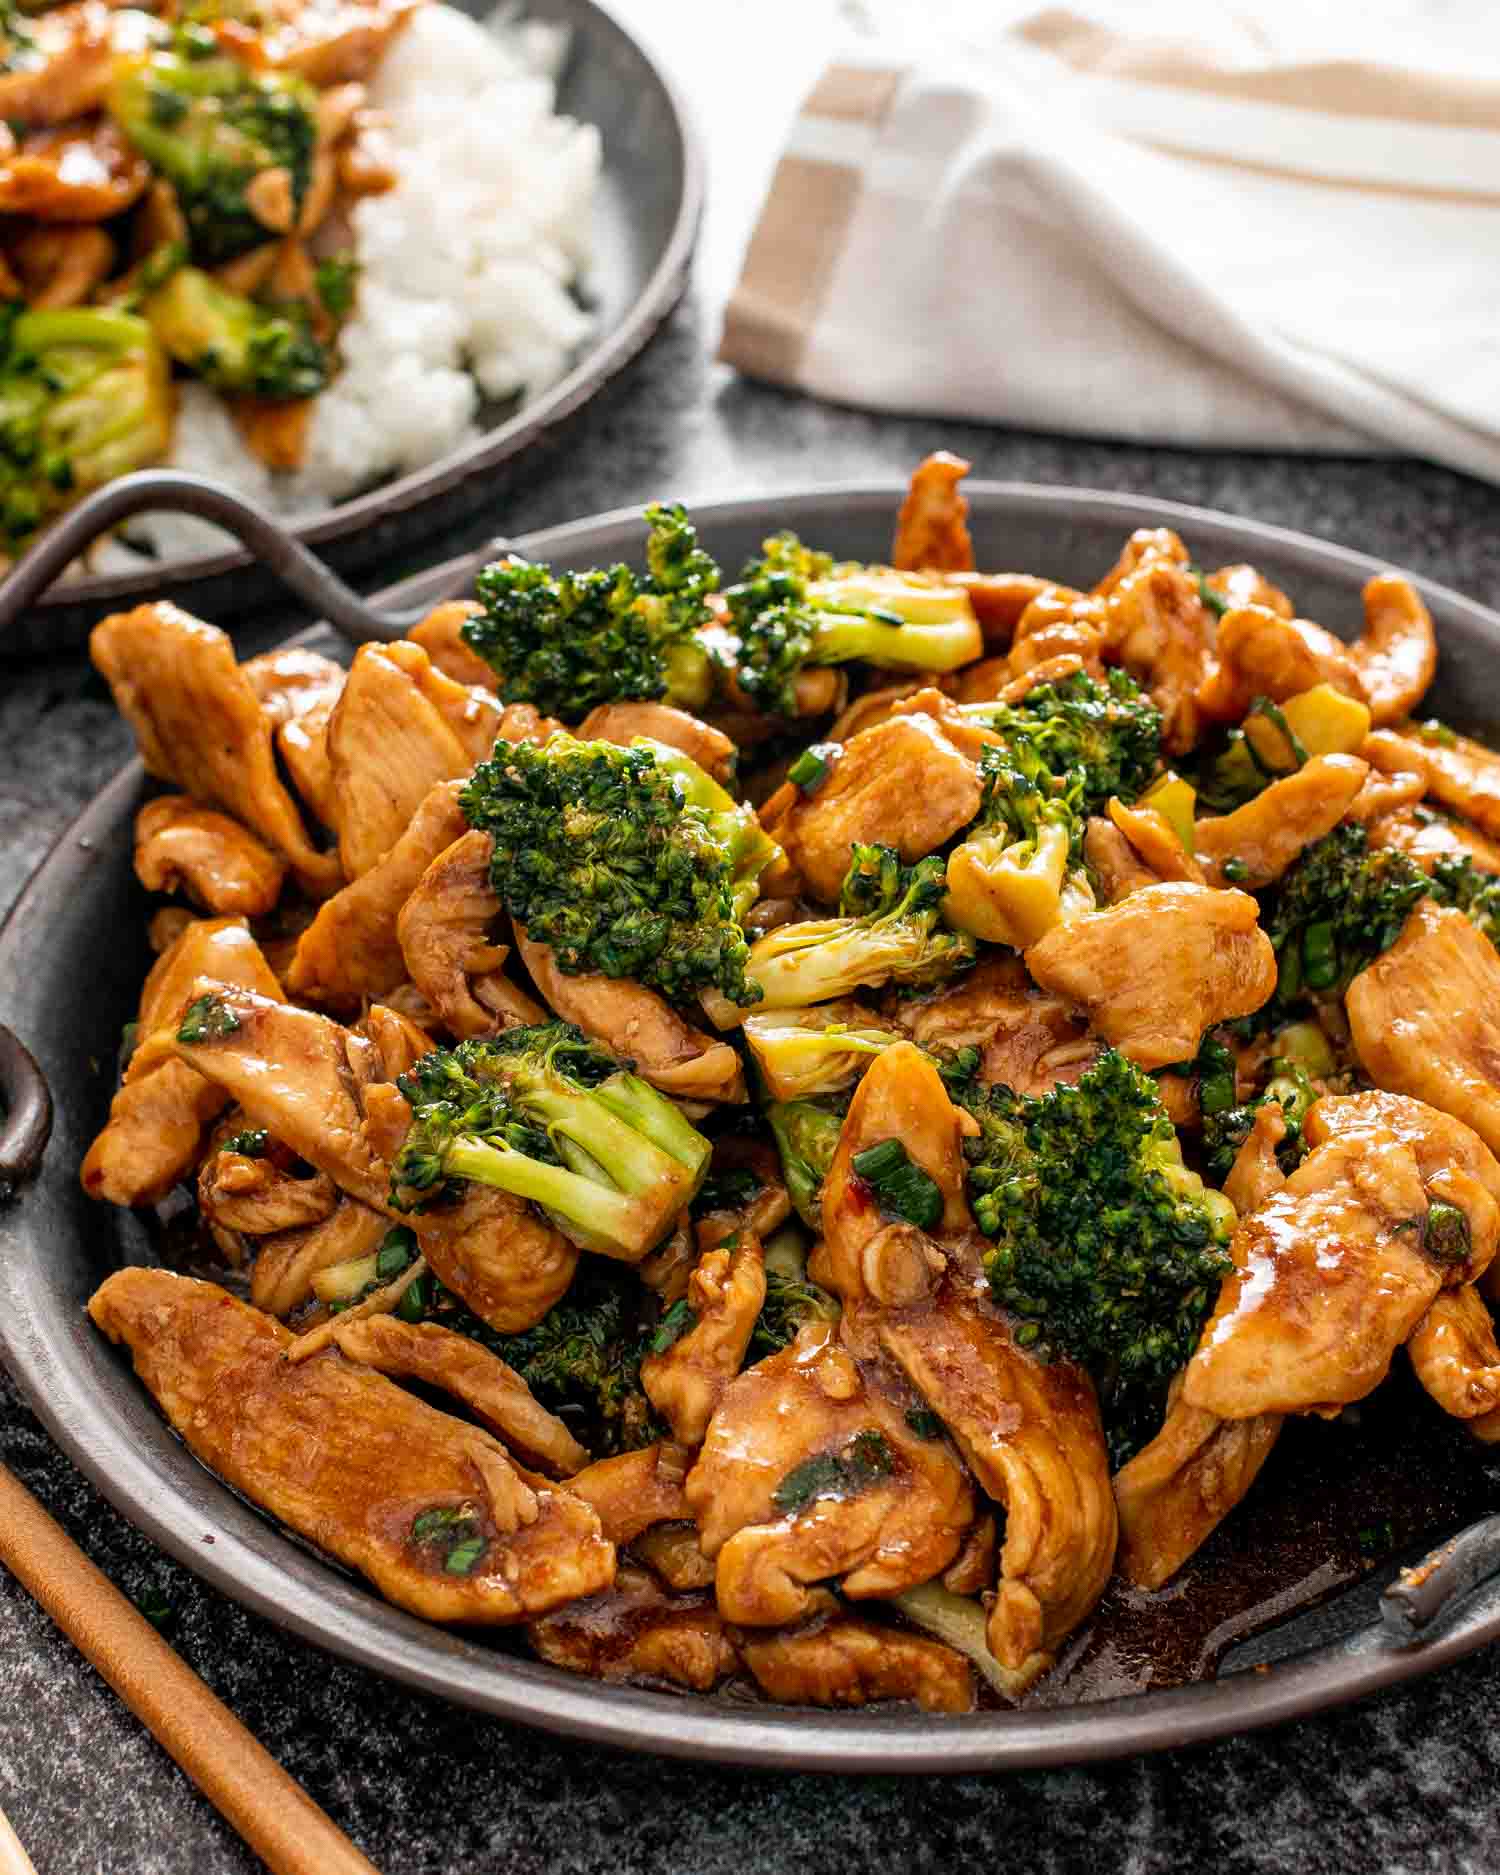 freshly made asian style chicken and broccoli on a metal plate.